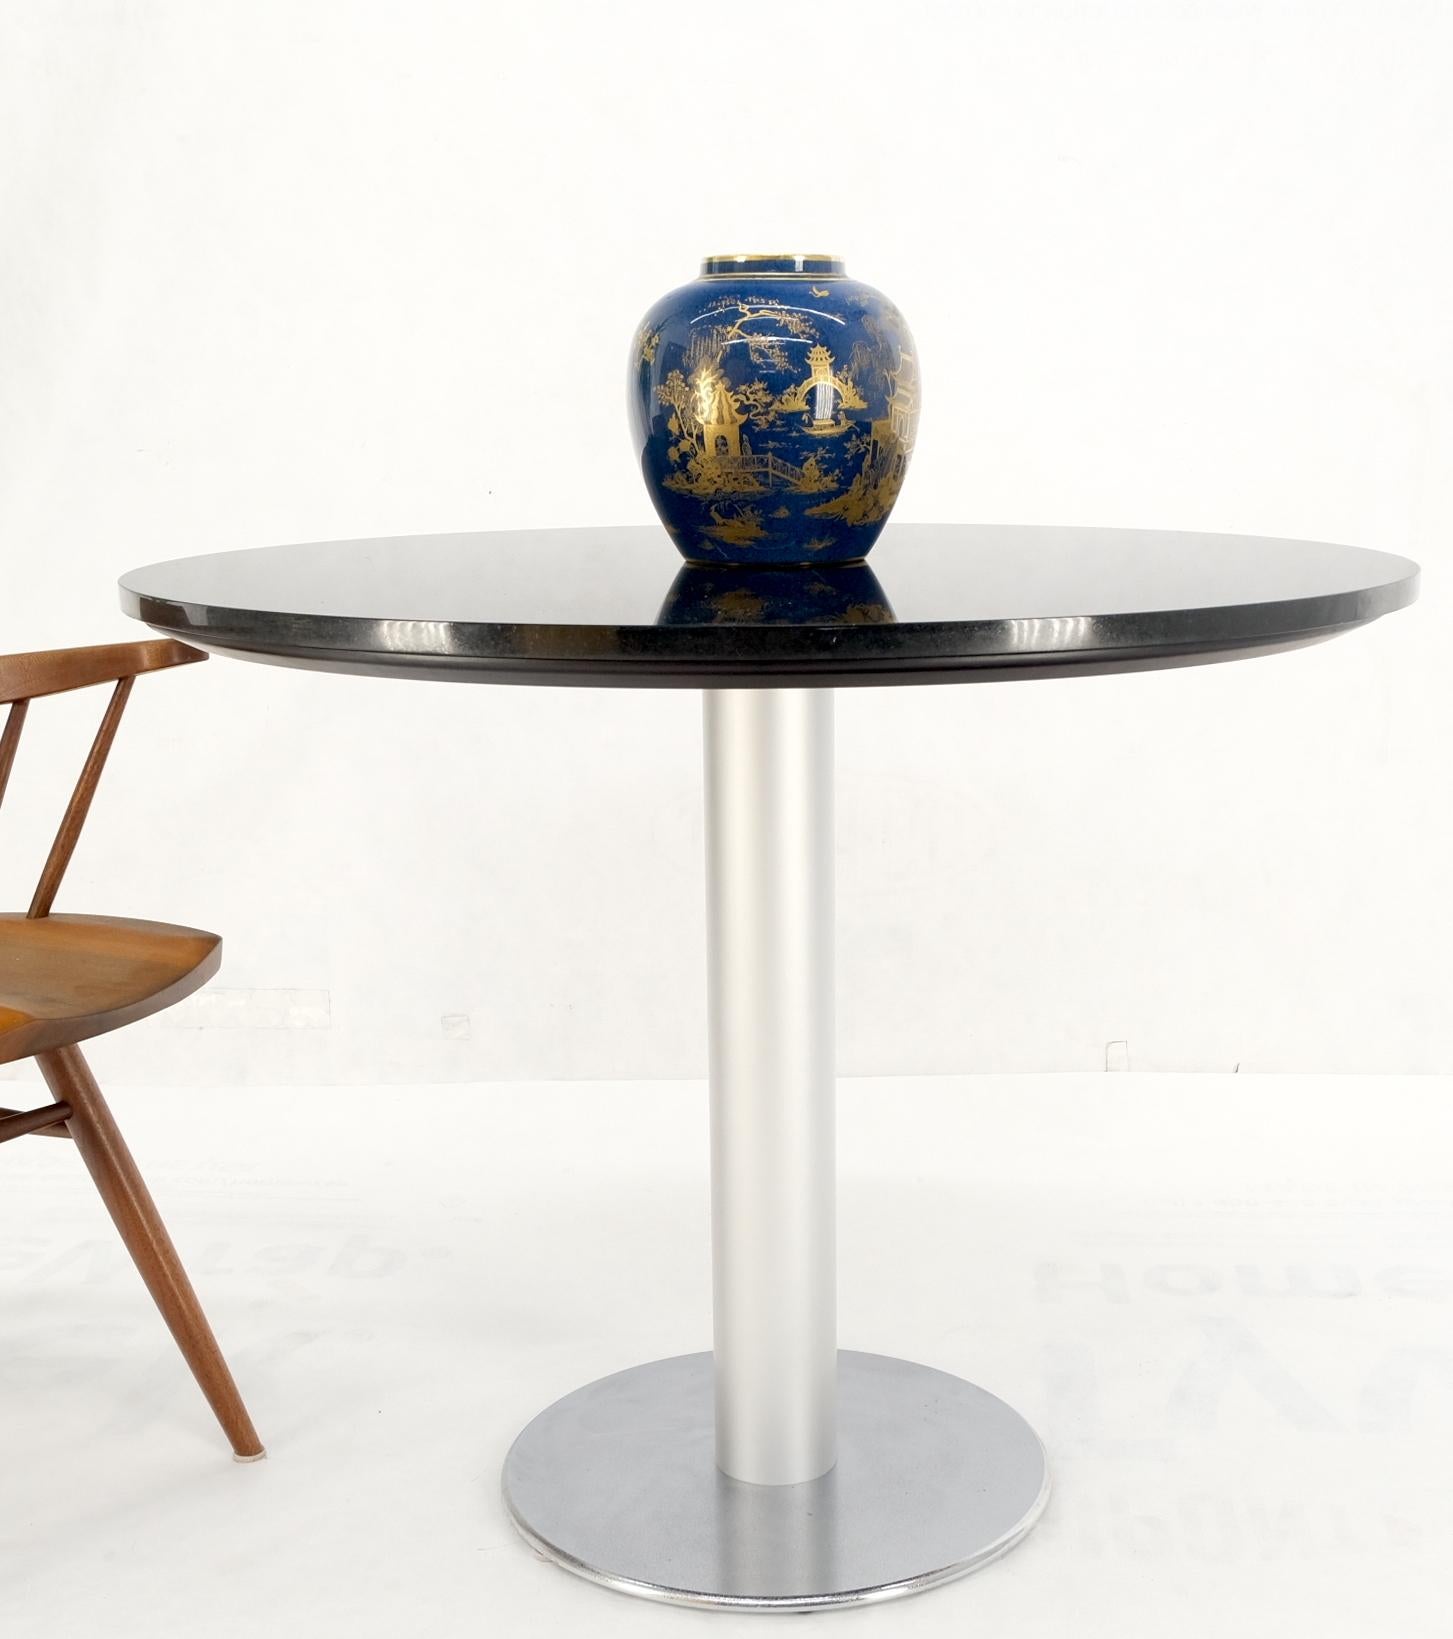 Black Granite Top Crome Pedestal Base Round Dining Table Mid Century Modern MINT For Sale 8